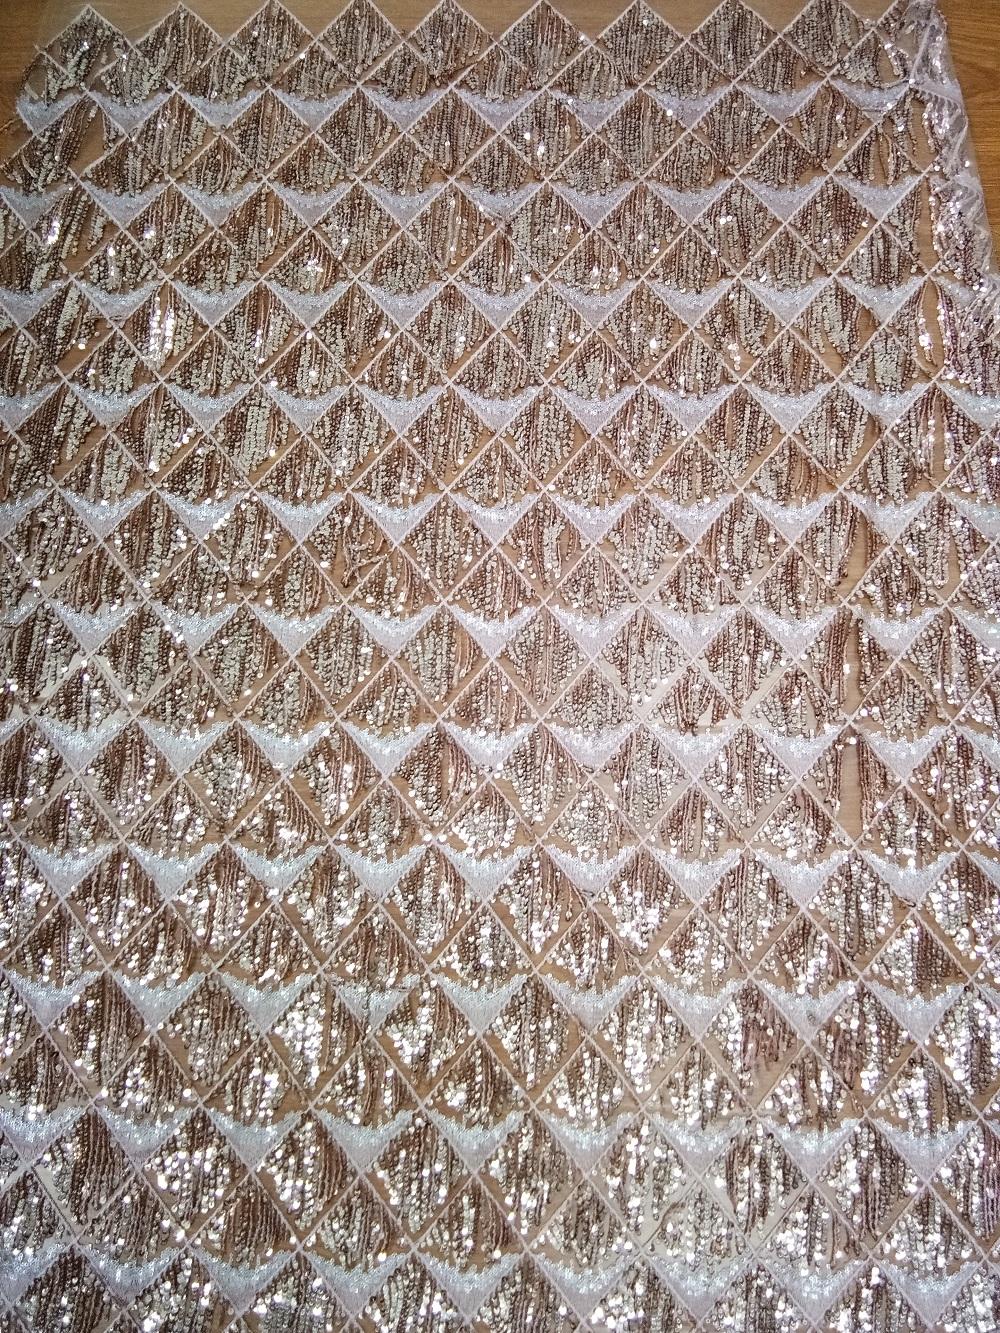 1yard /lot African Flower Sequin Embroidery Indian Nigerian Lace Fabric For Wedding Dress: Gold